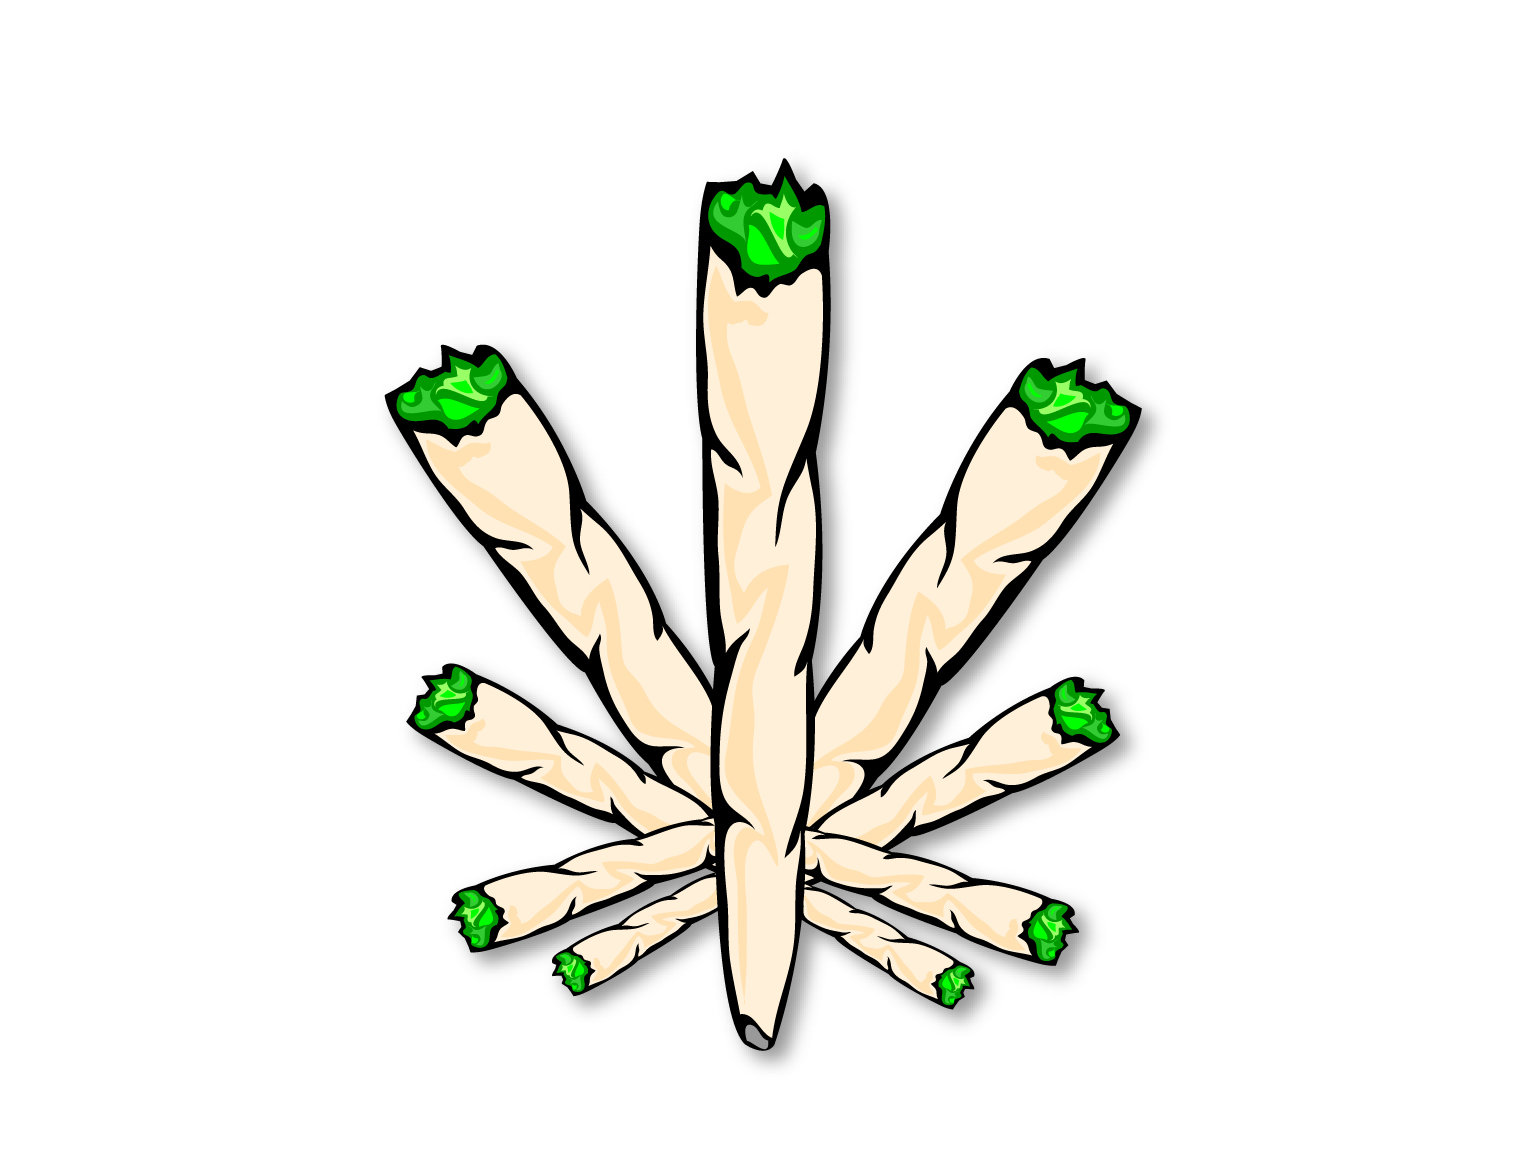 Perfect weed drawing pic.